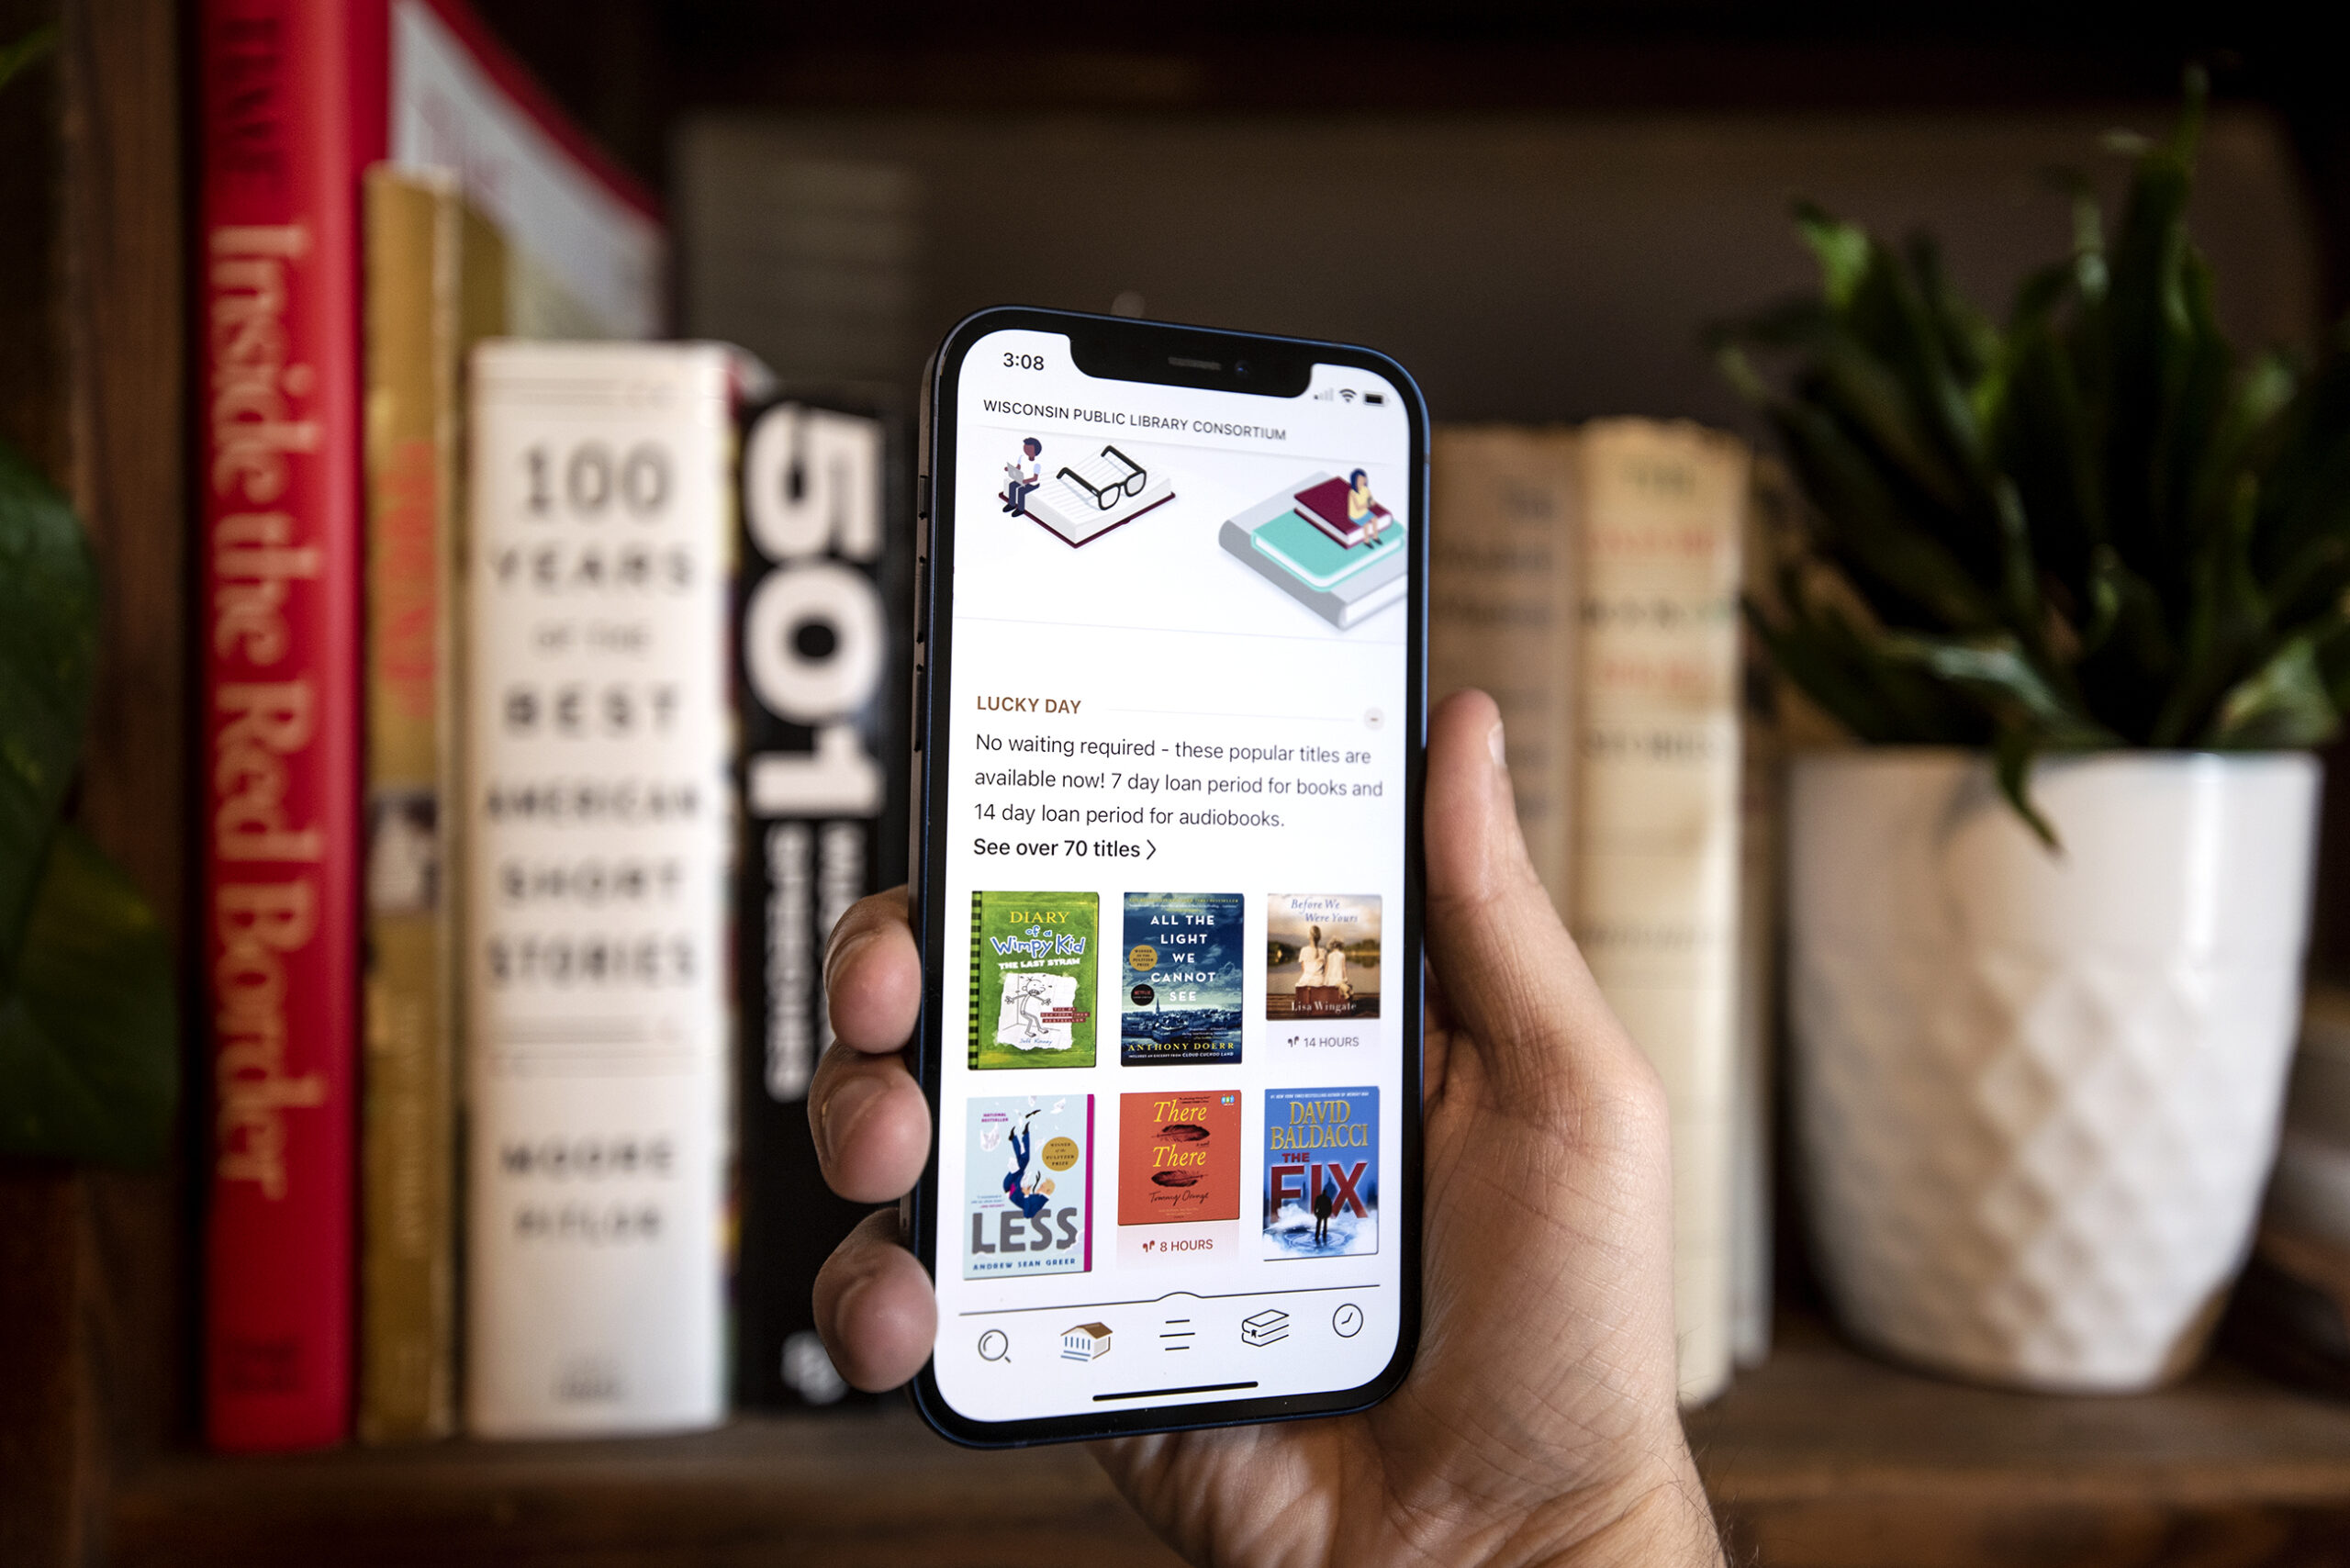 A phone showing an app with a collage of book covers is held in front of a book shelf